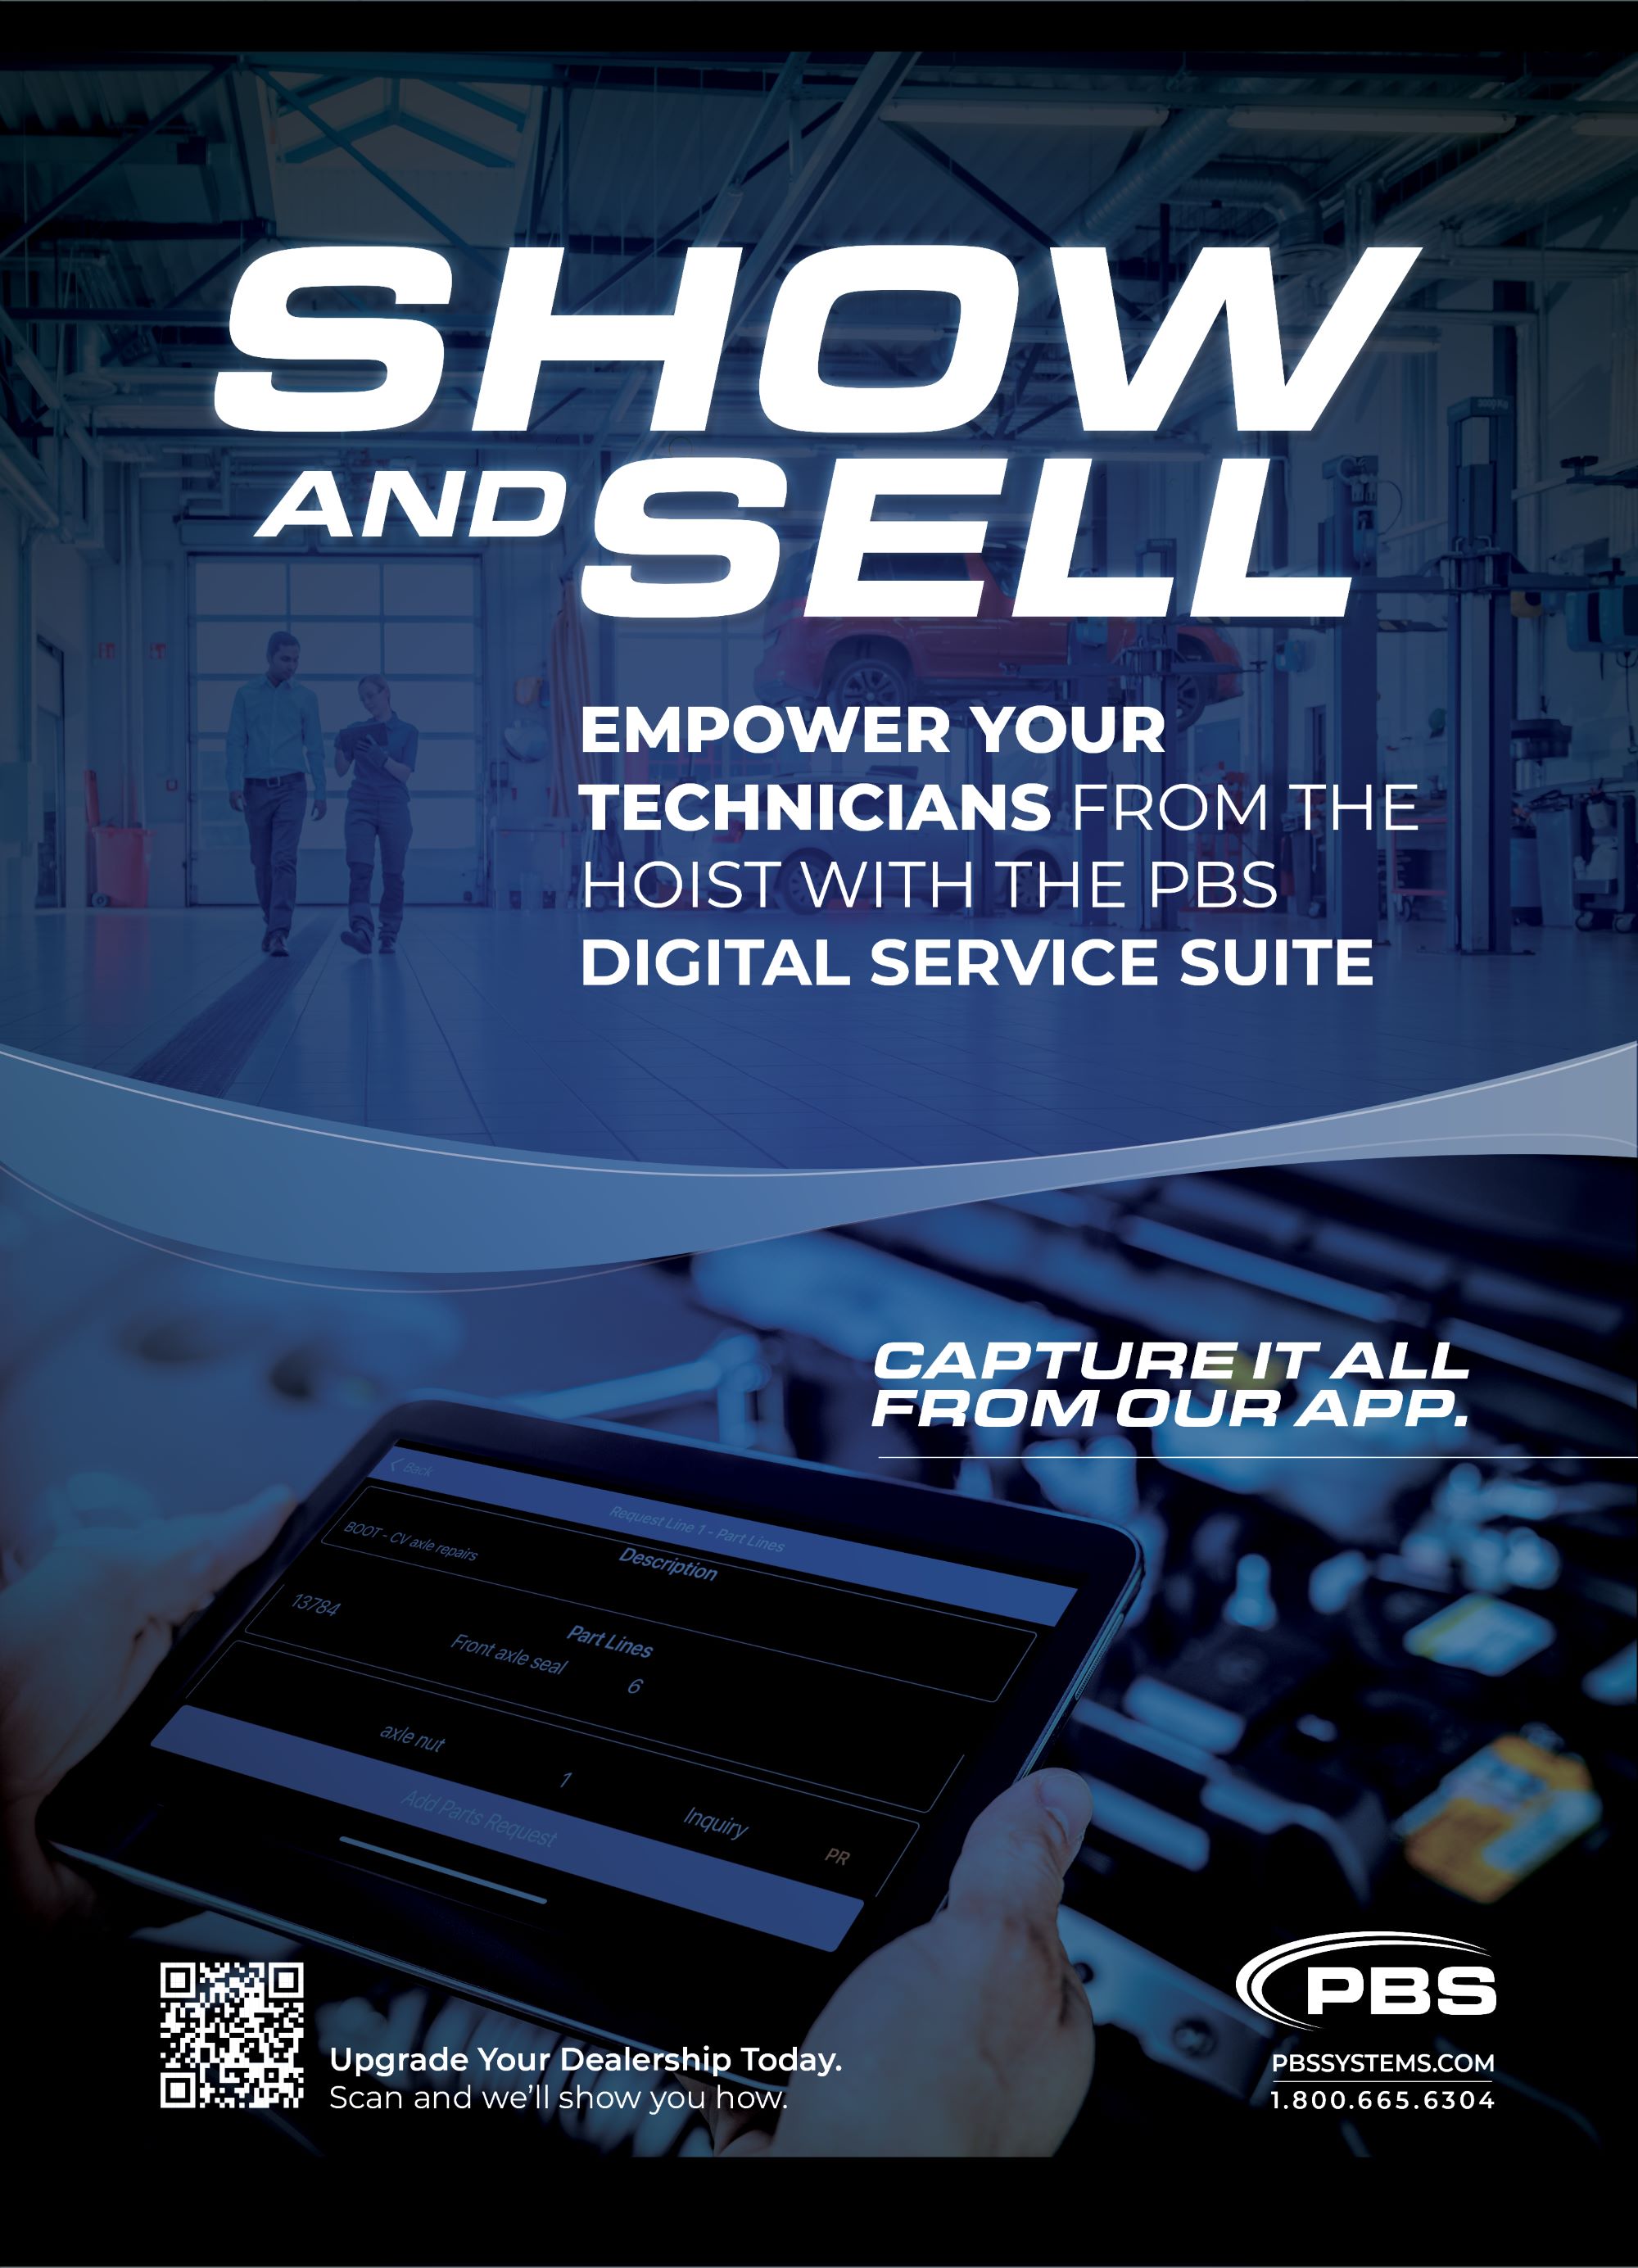 Empower Your Technicians from the Hoist